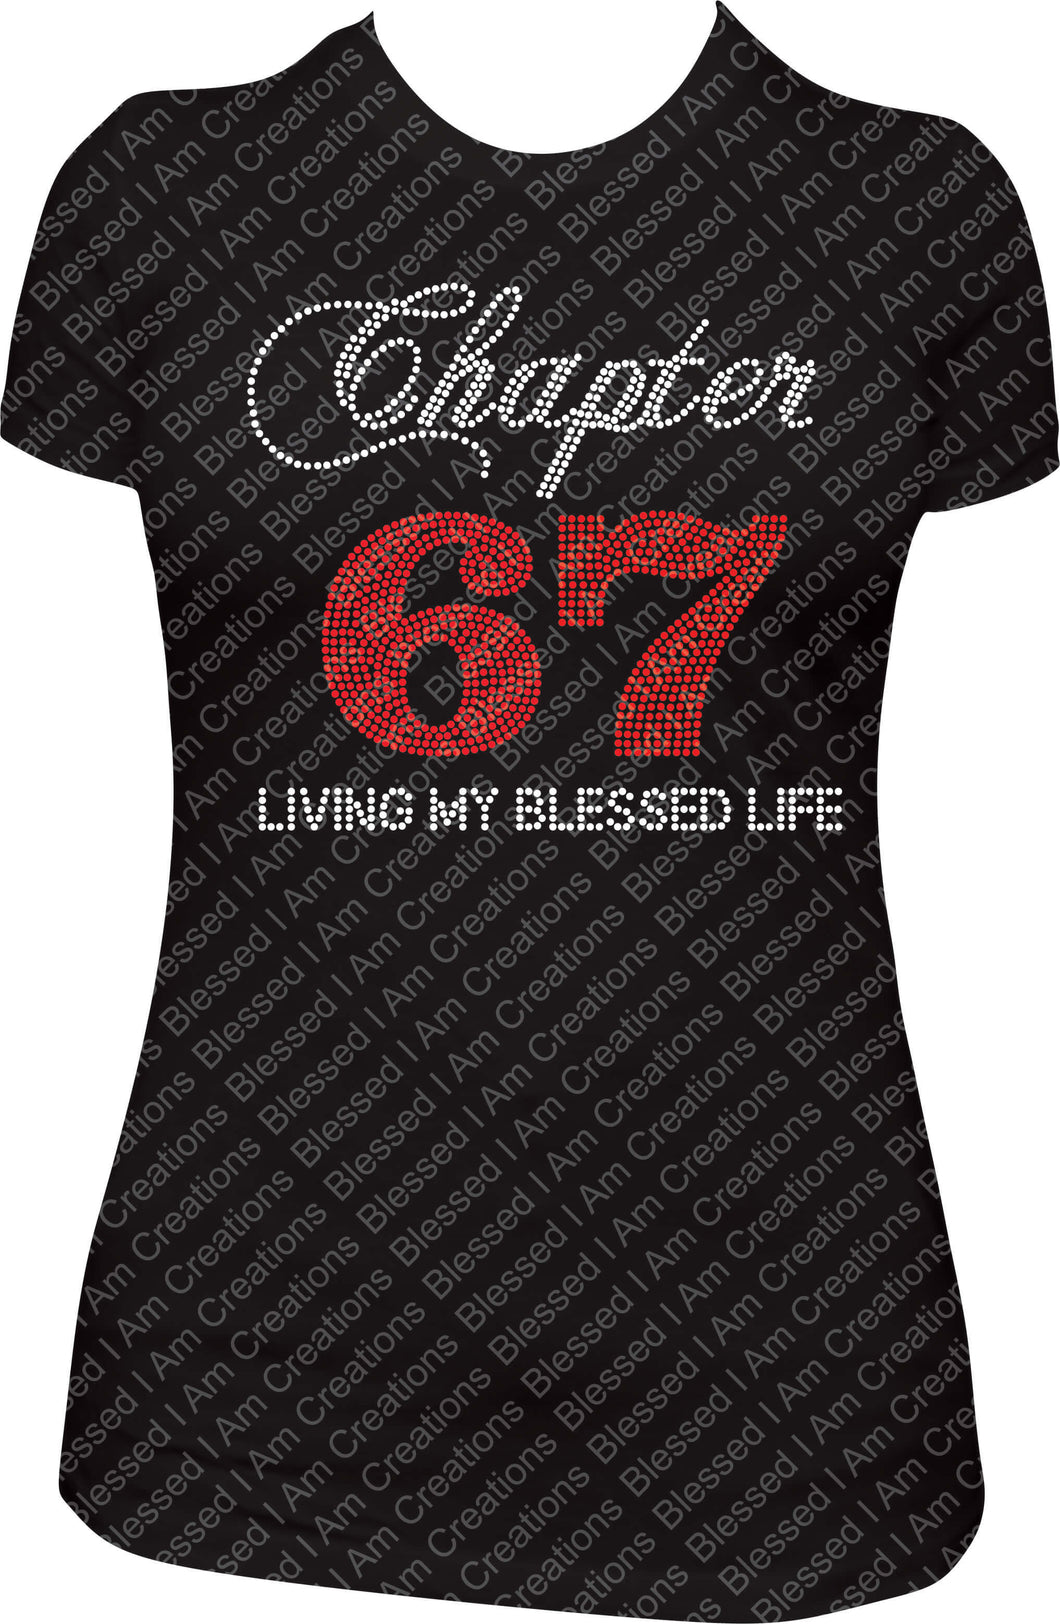 chapter 67 living my blessed life shirt, chapter birthday shirt, bling shirt, bling birthday shirt, rhinestone shirt, rhinestone birthday shirt, 67th birthday shirt, 67 birthday shirt, living my blessed life shirt, birthday girl shirt, black shirt 